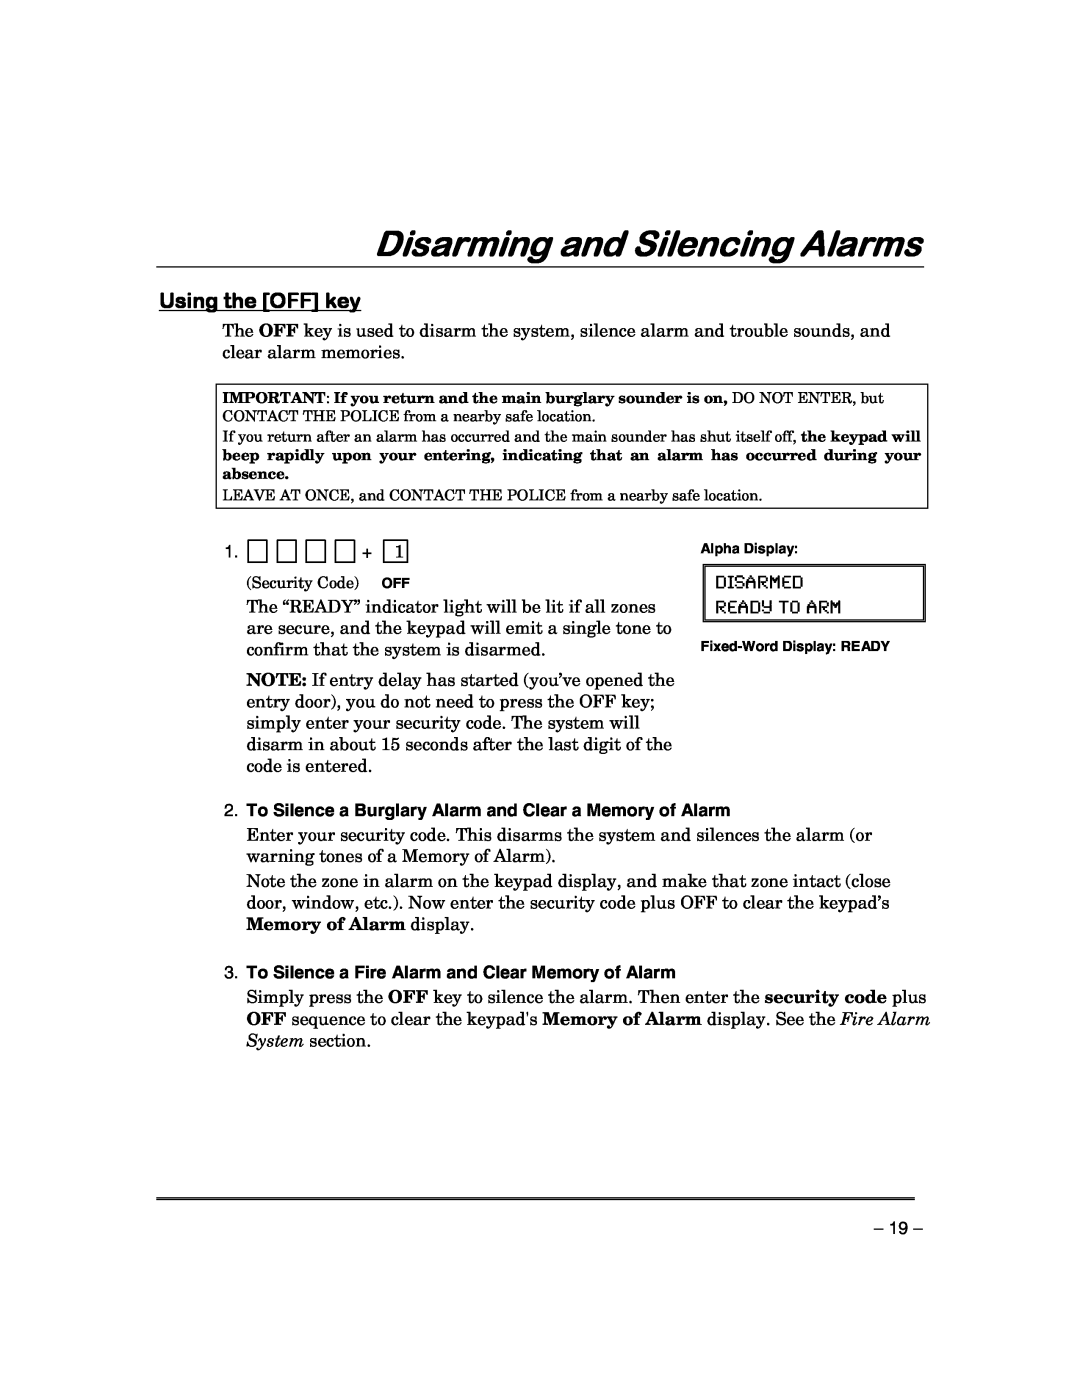 First Alert FA168CPSSIA, FA148CPSIA manual Disarming and Silencing Alarms, Using the OFF key, Disarmed Ready To Arm 